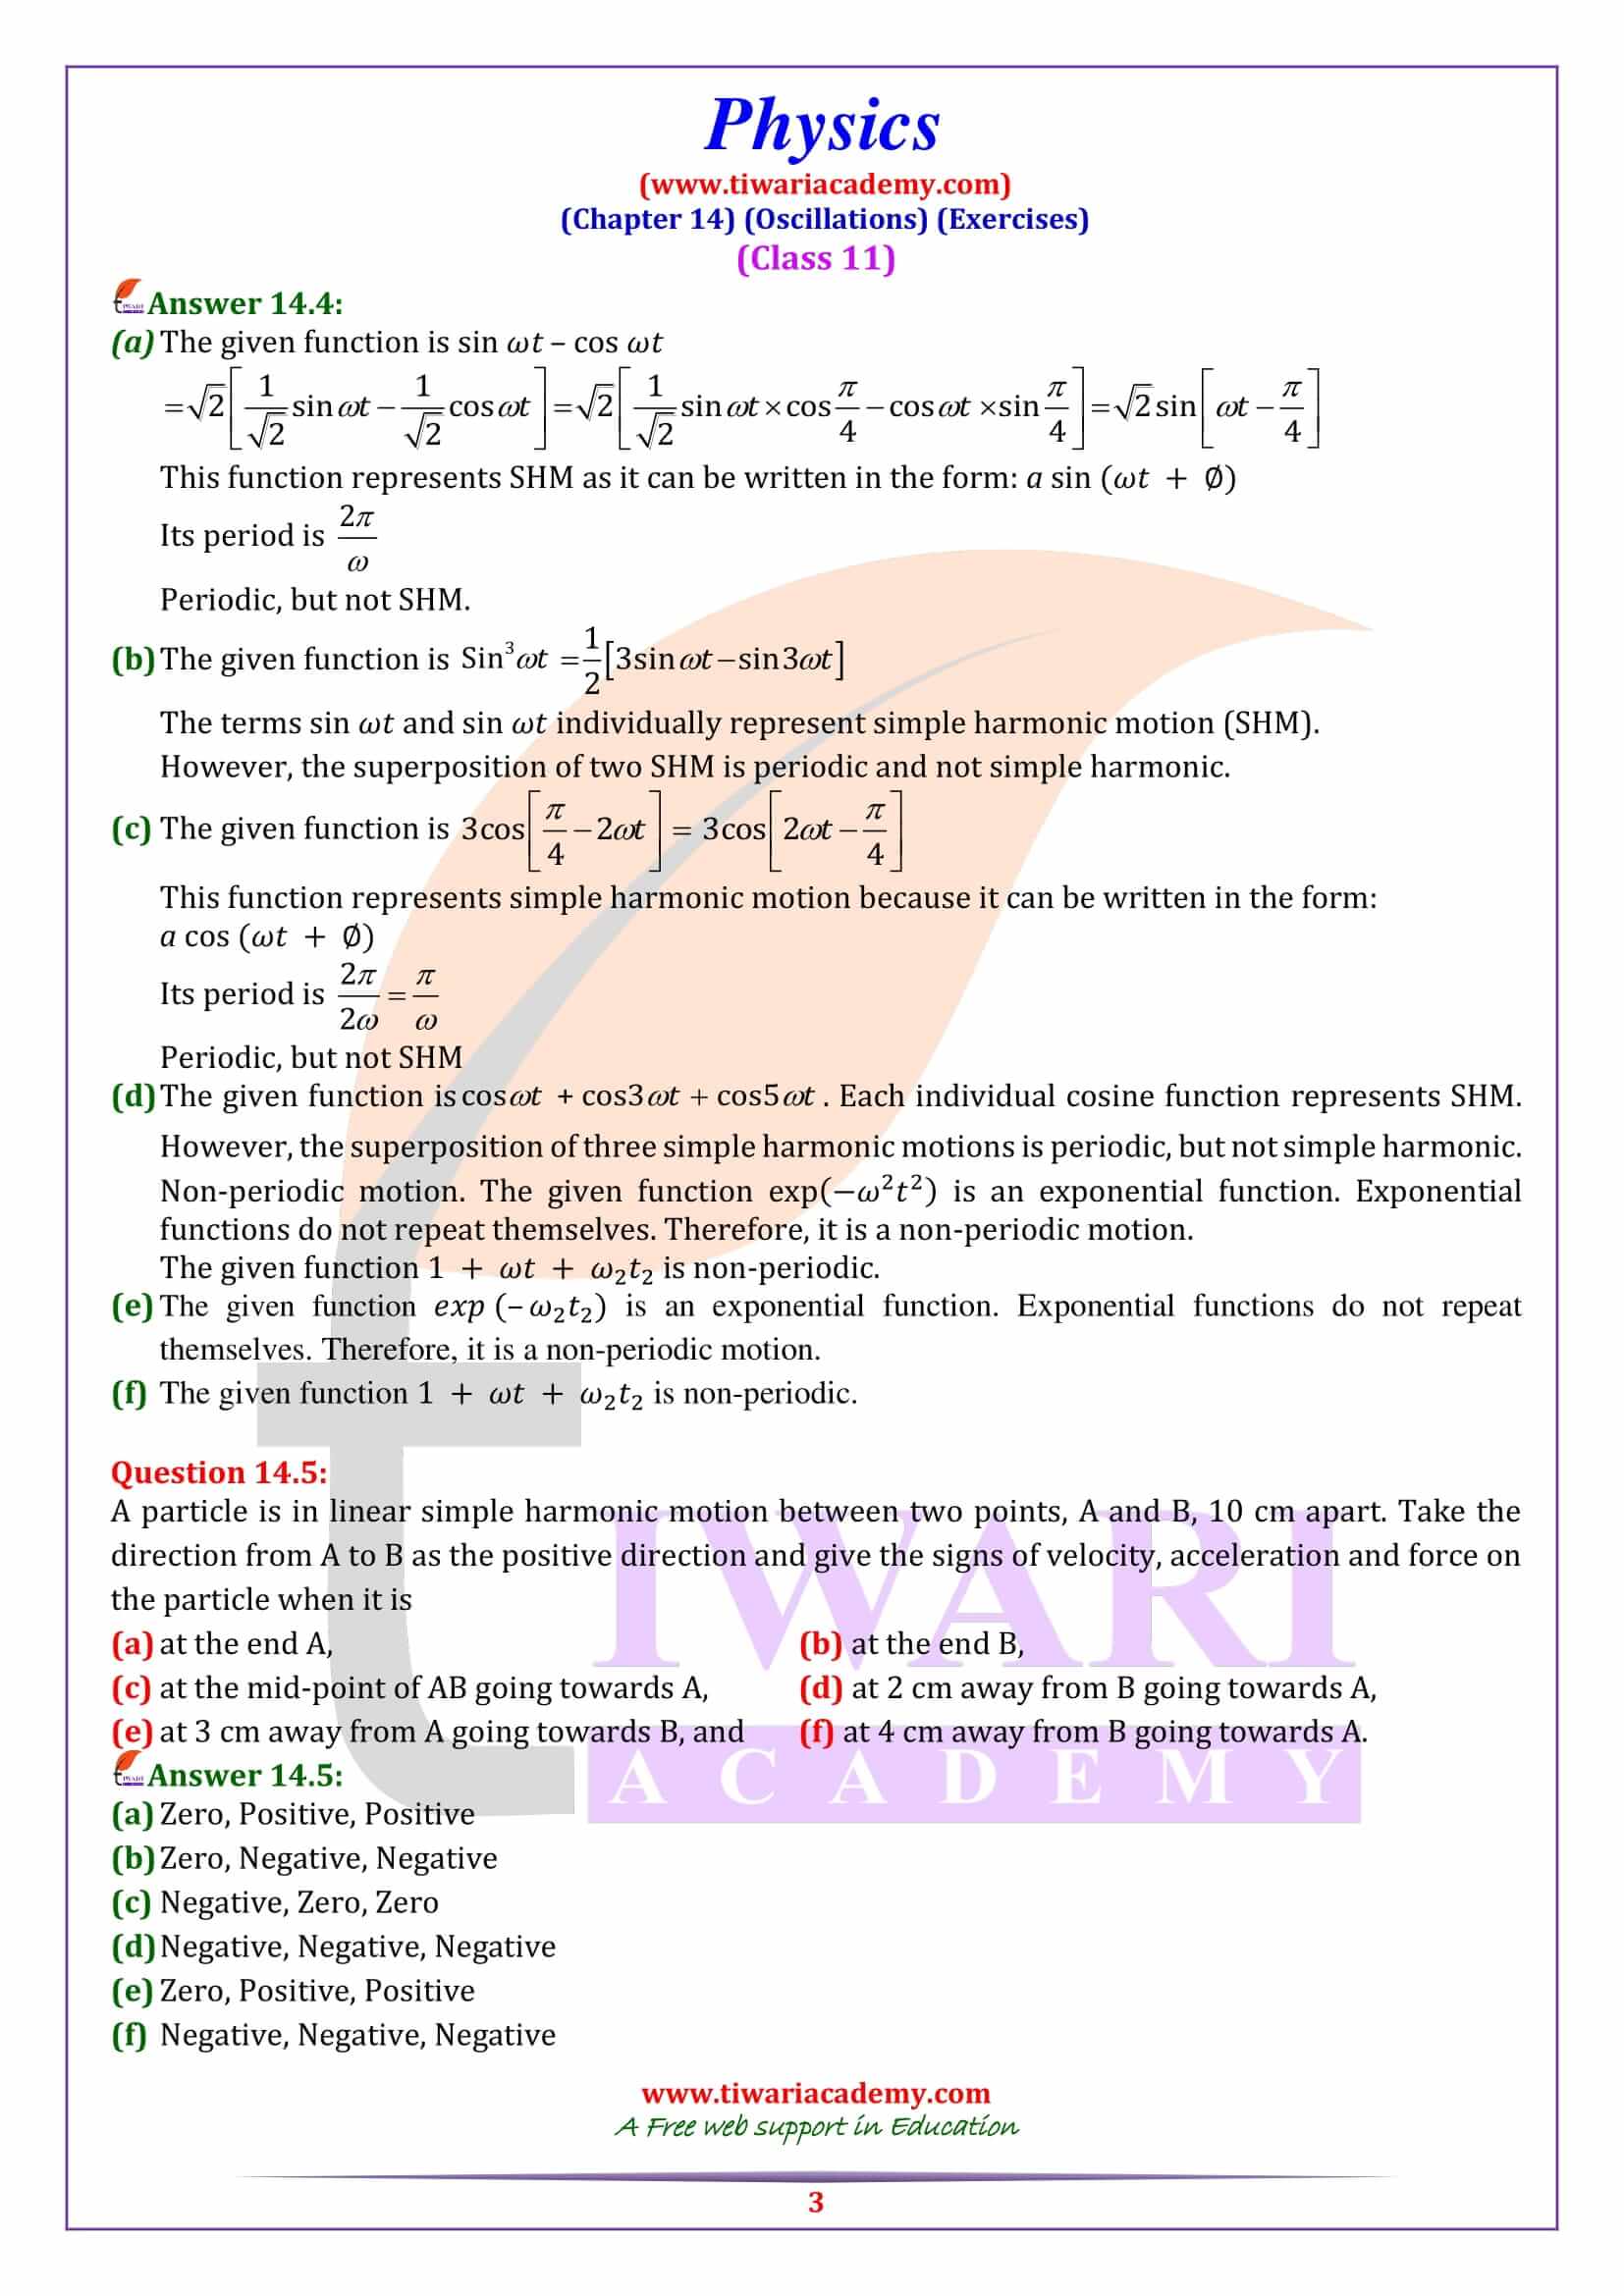 NCERT Solutions for Class 11 Physics Chapter 14 in PDF file